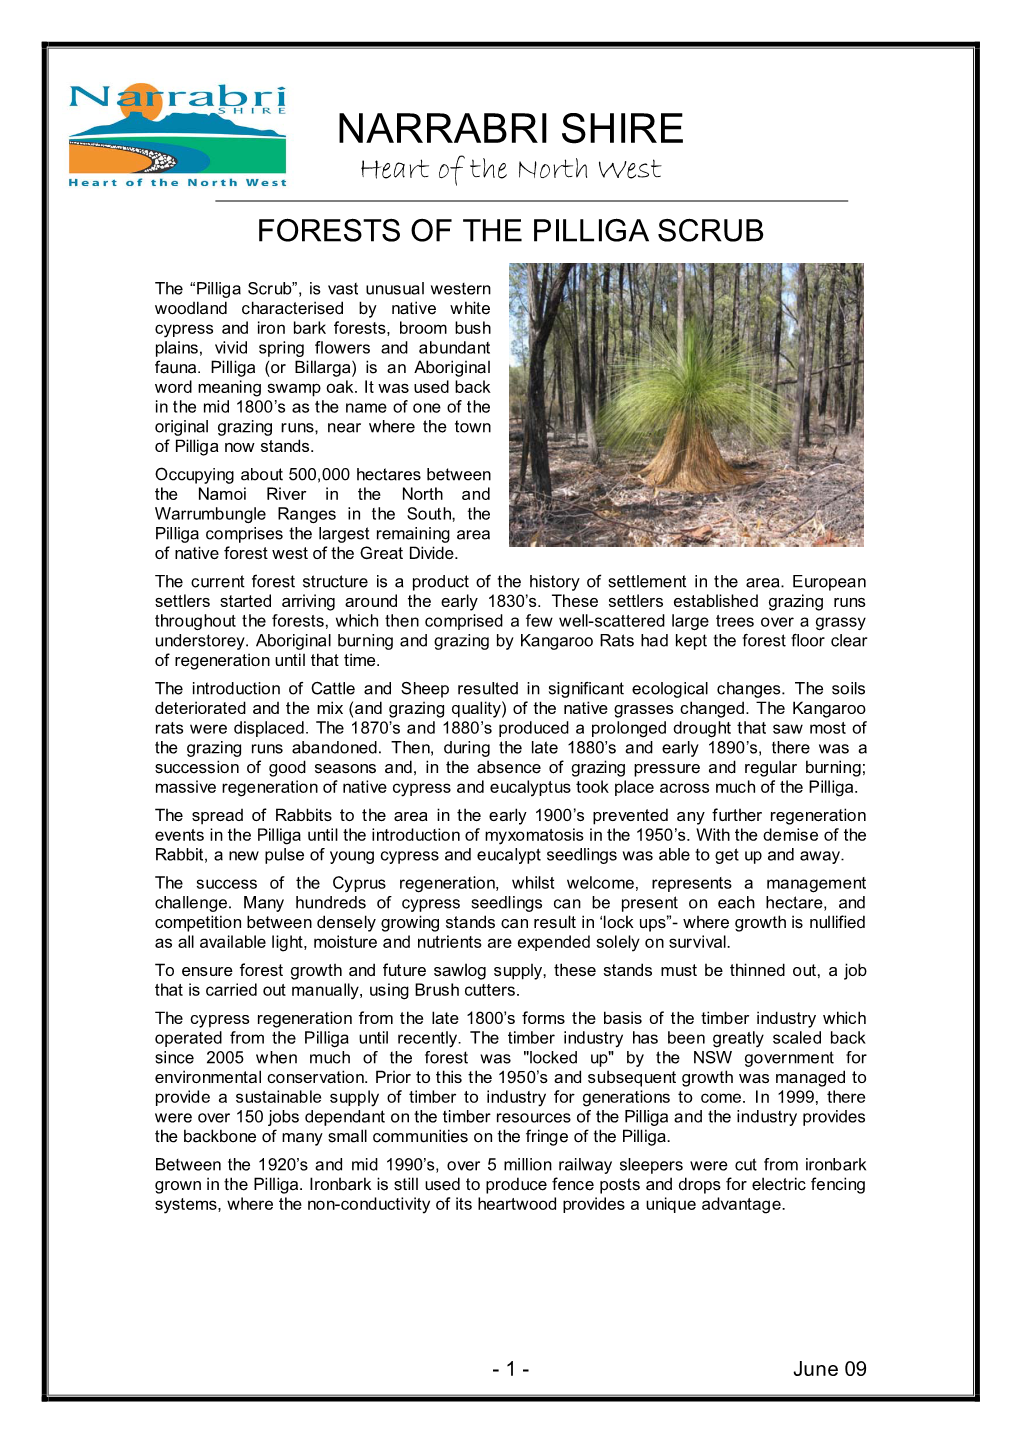 Forests of the Pilliga Scrub